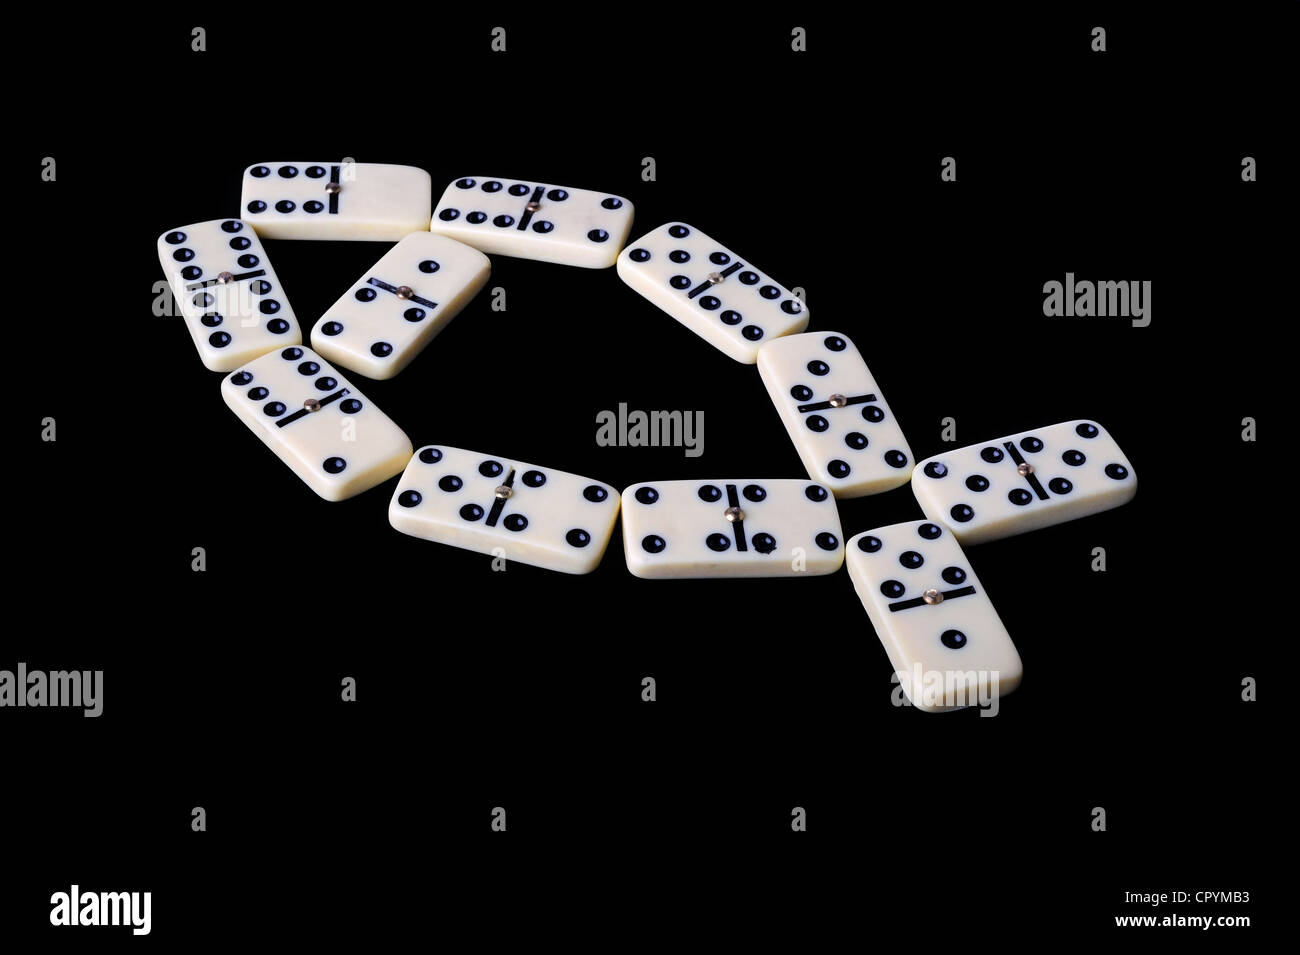 Domino isolated on a black background Stock Photo